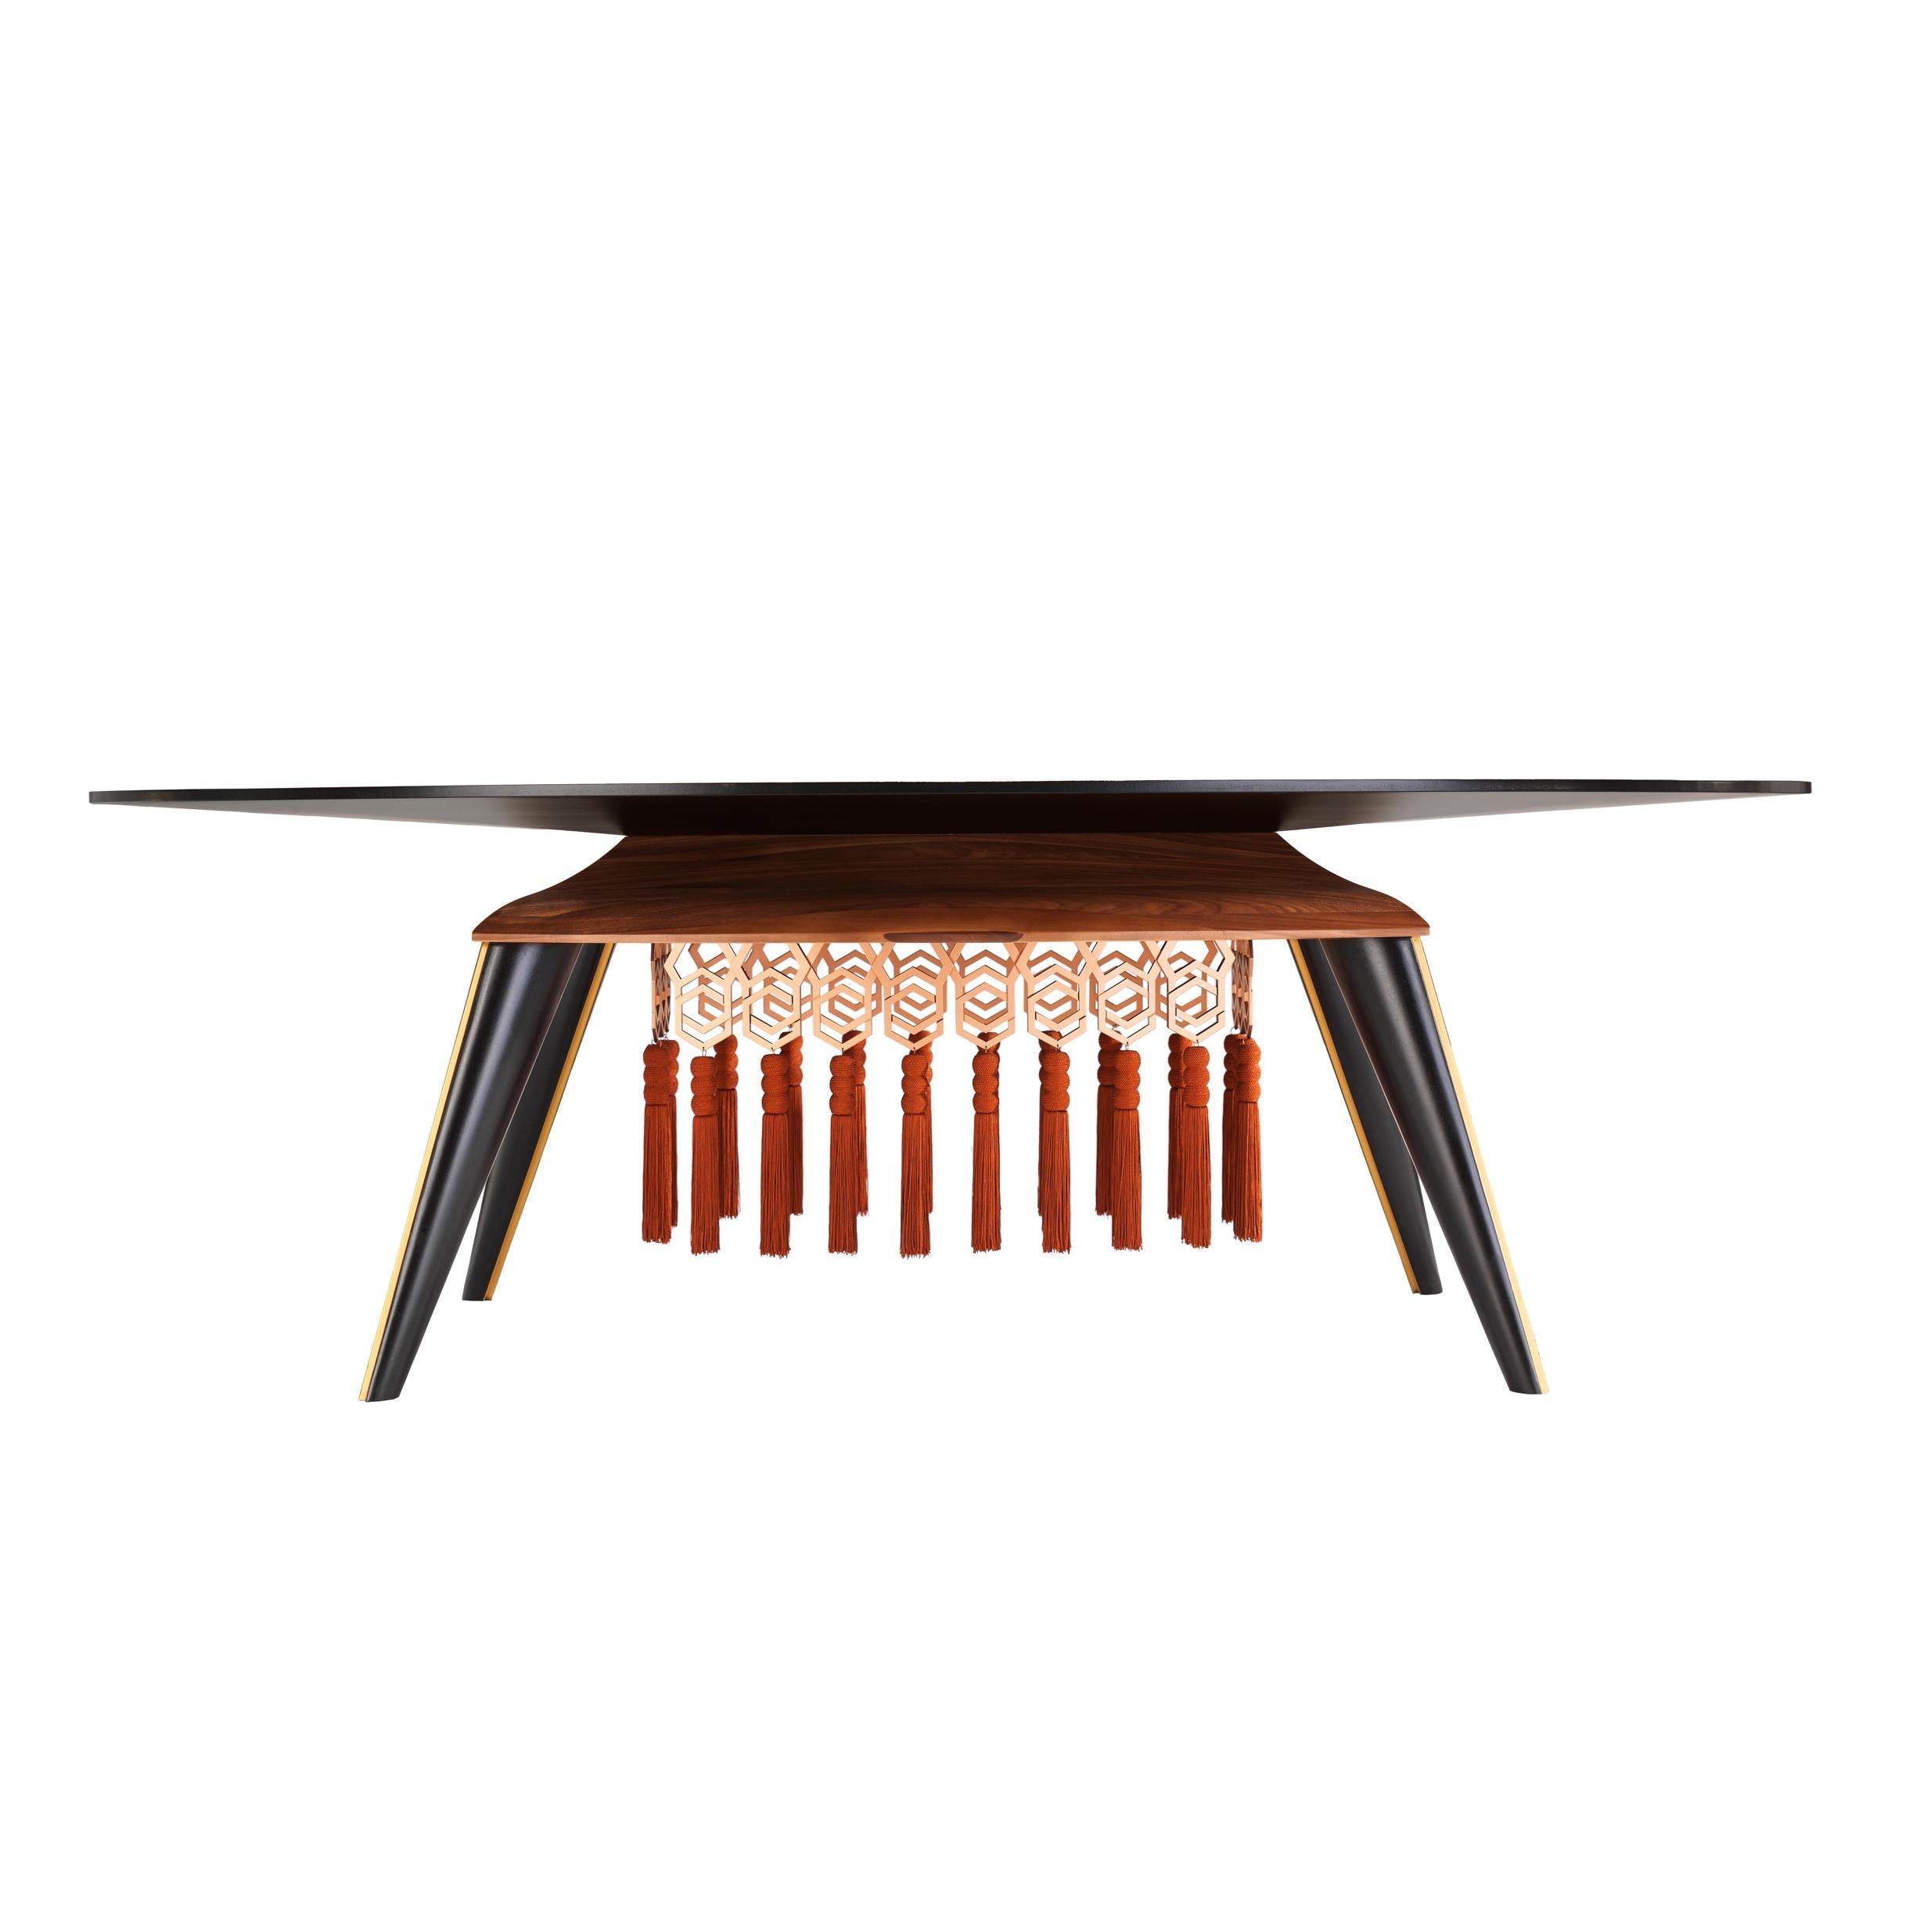 Butterflies flutter on this tabletop, getting lost in the hexagonal decorations that characterized this collection. Adorned with tassels and copper decorations, the table can seat 4-6 people.
Top with inlay in white/black wood veneer with copper